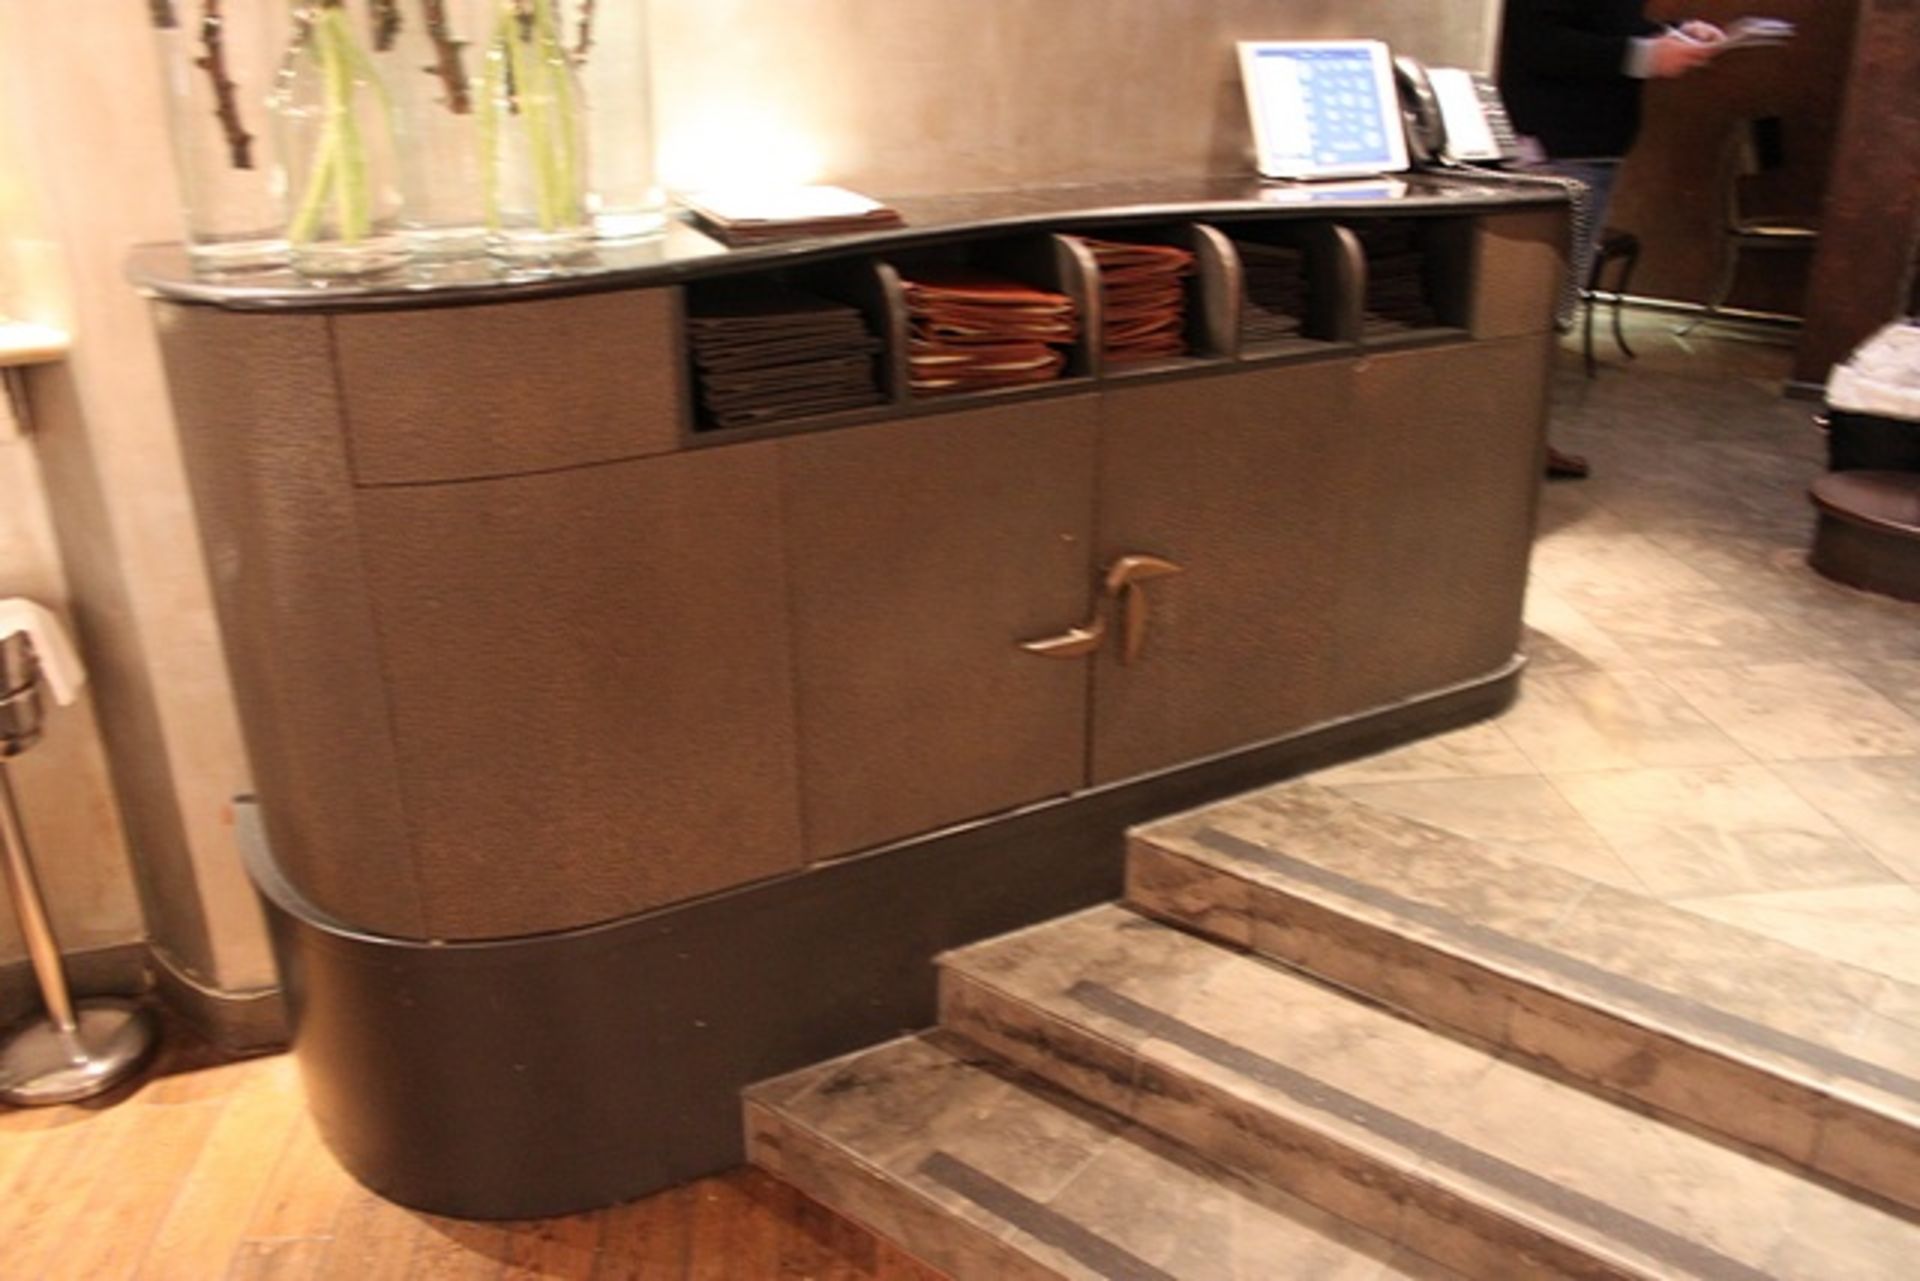 Dumb waiter station sideboard wooded framed cabinet finished in bronzed copper facia doors with - Image 2 of 2